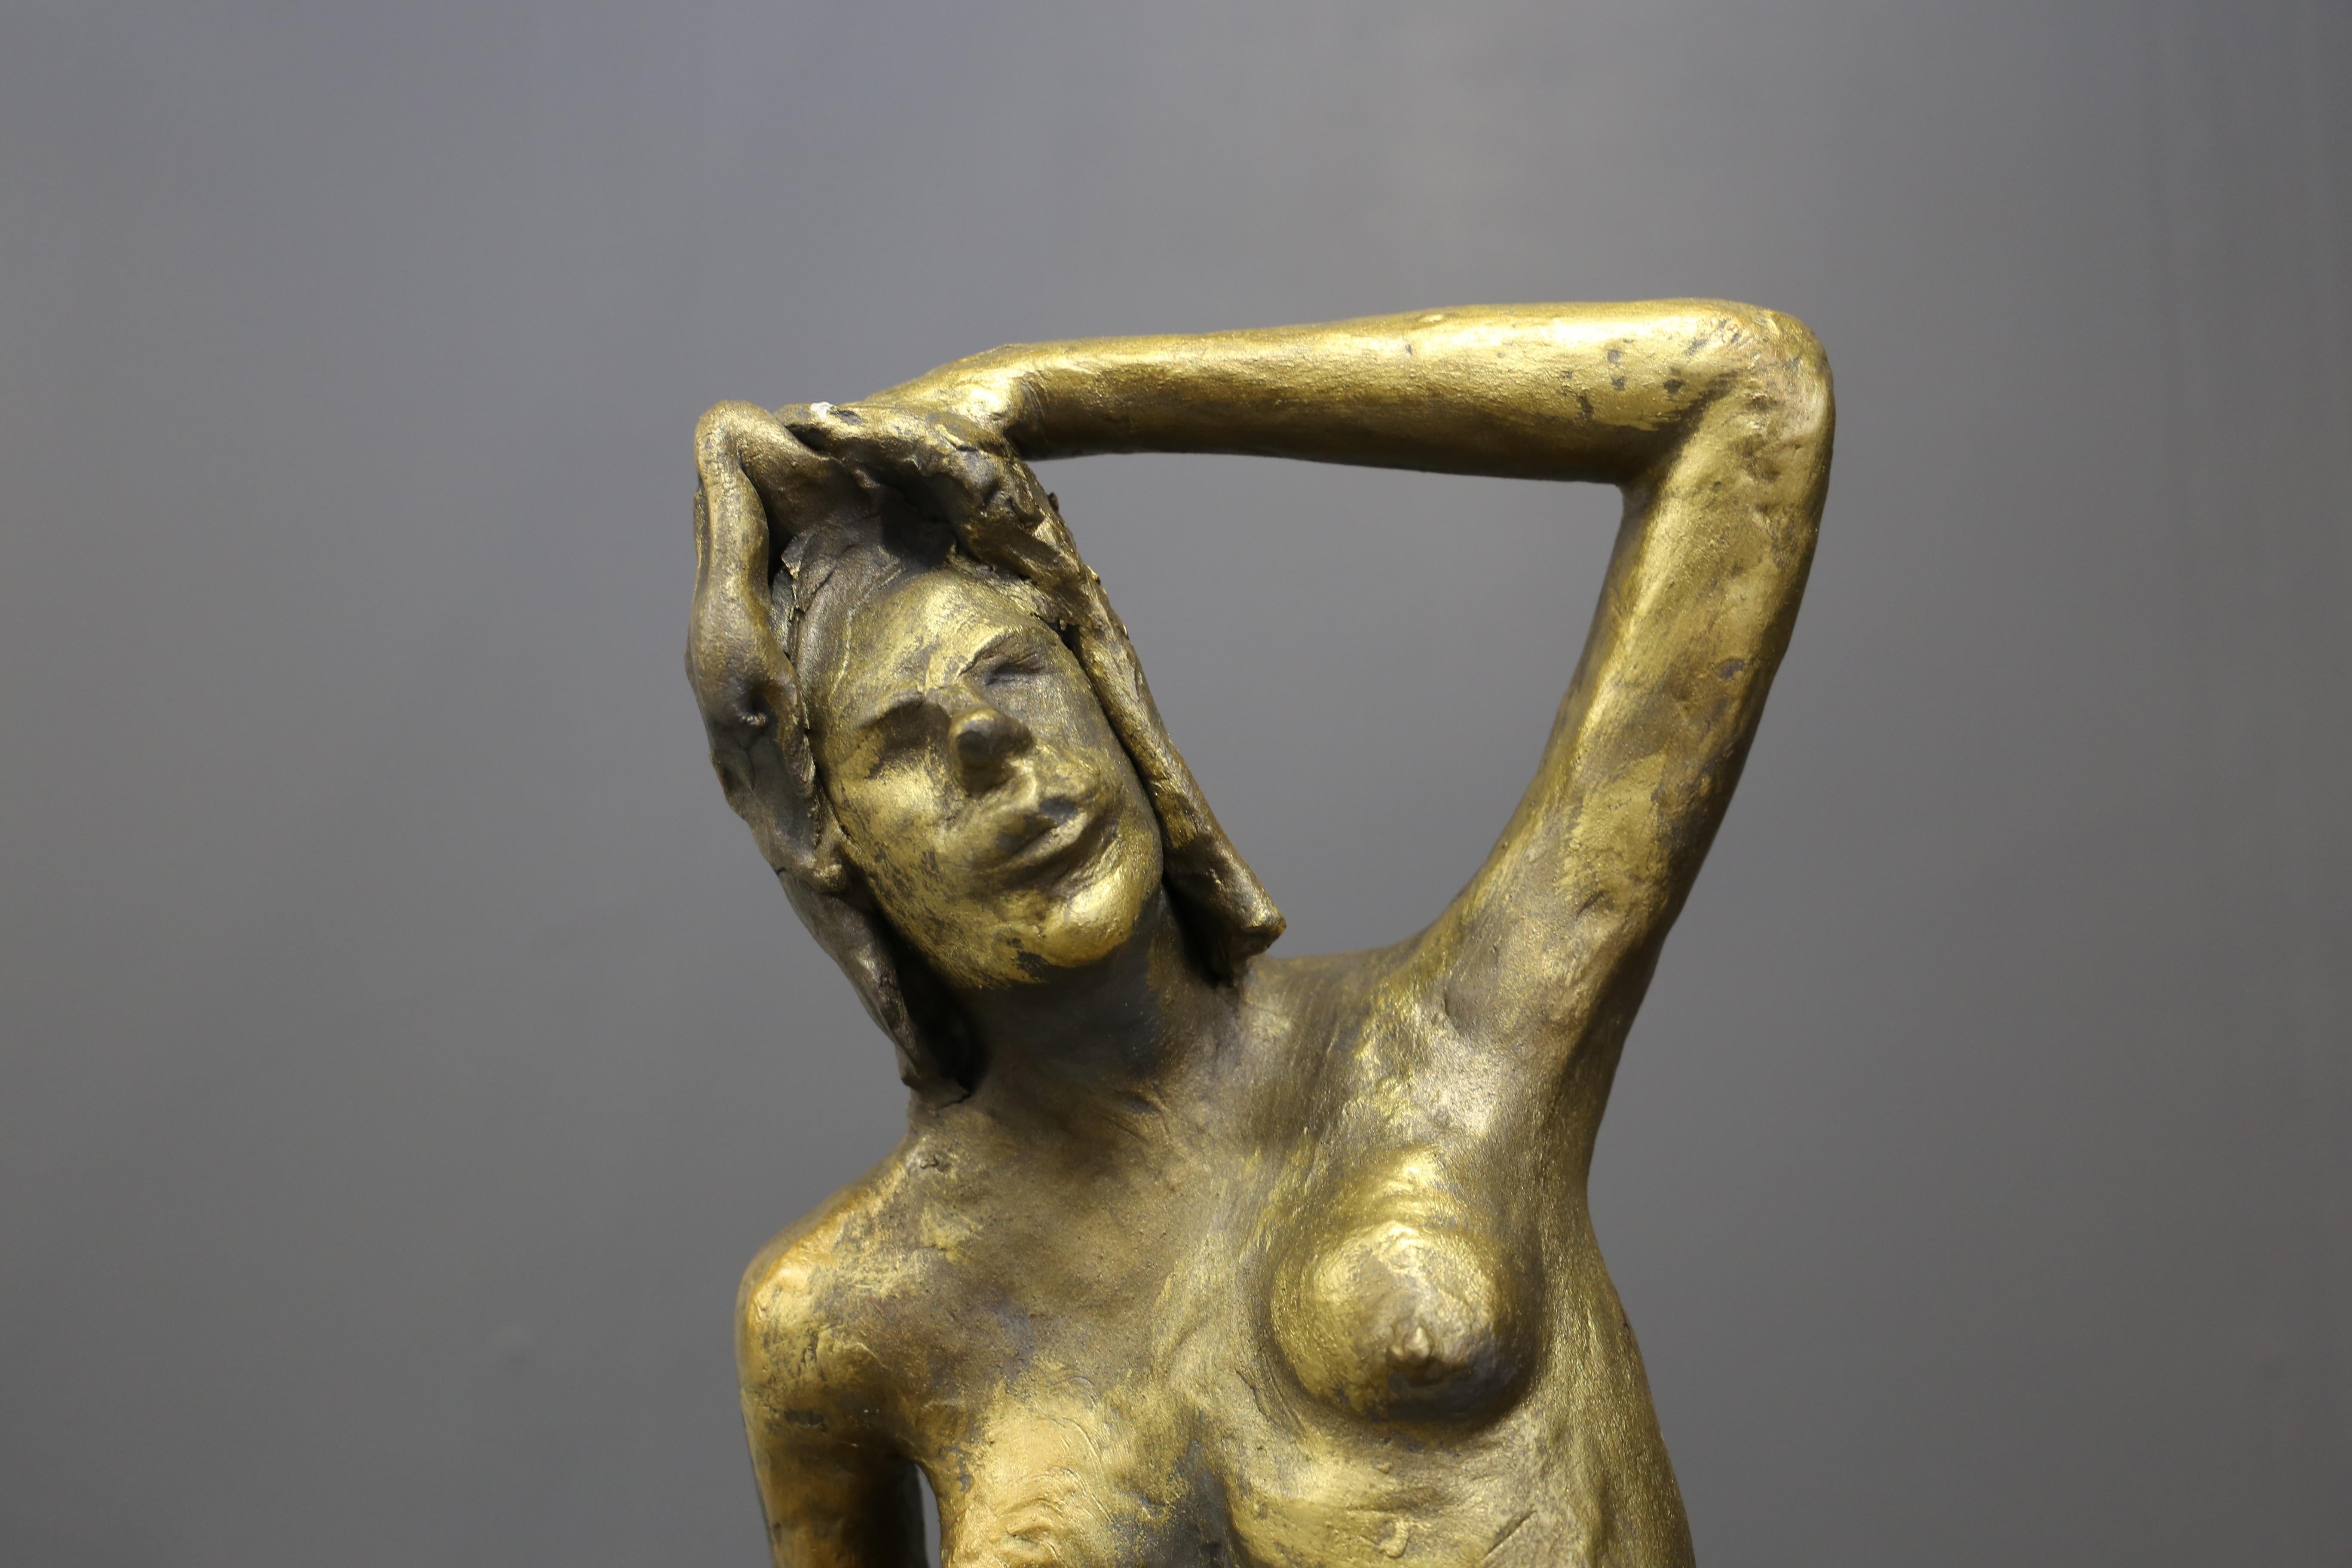 Mid-Century Modern Biagio Romeo Woman Sculpture, Signed 1996 For Sale